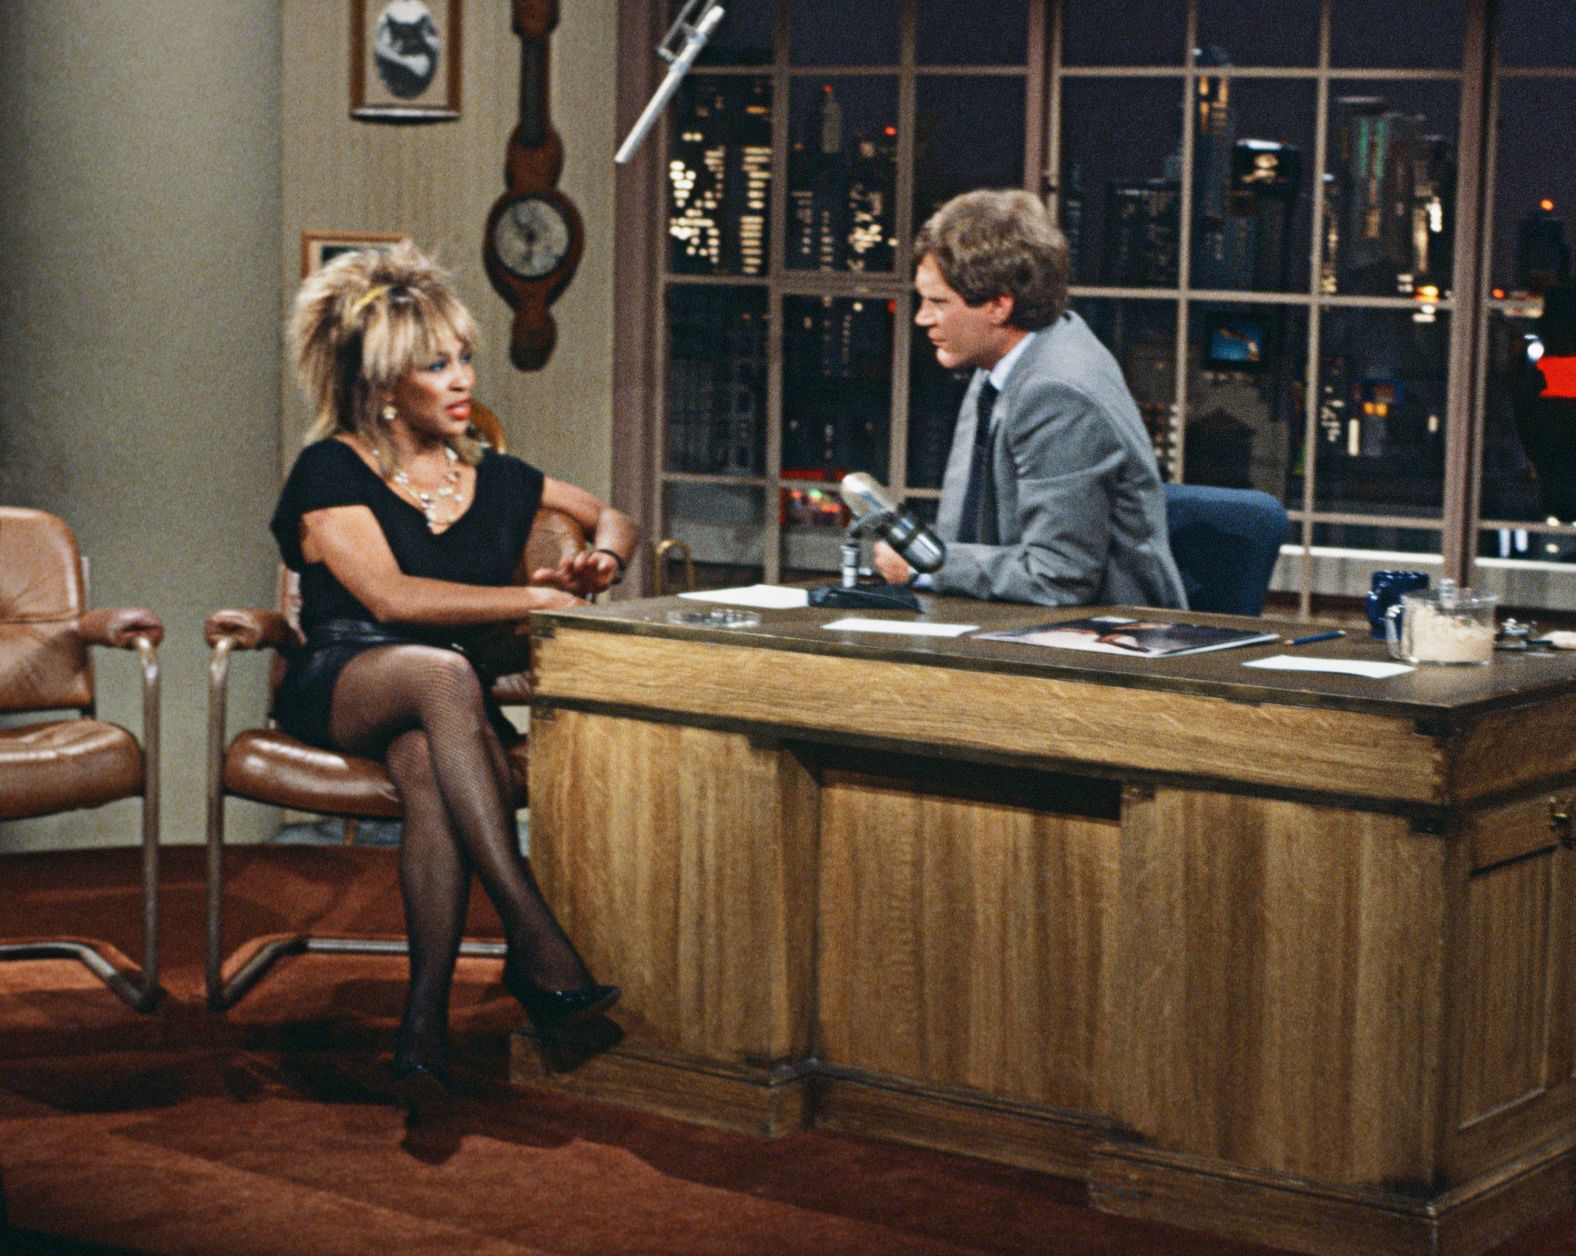 Turner appears on David Letterman's late-night talk show in 1984.